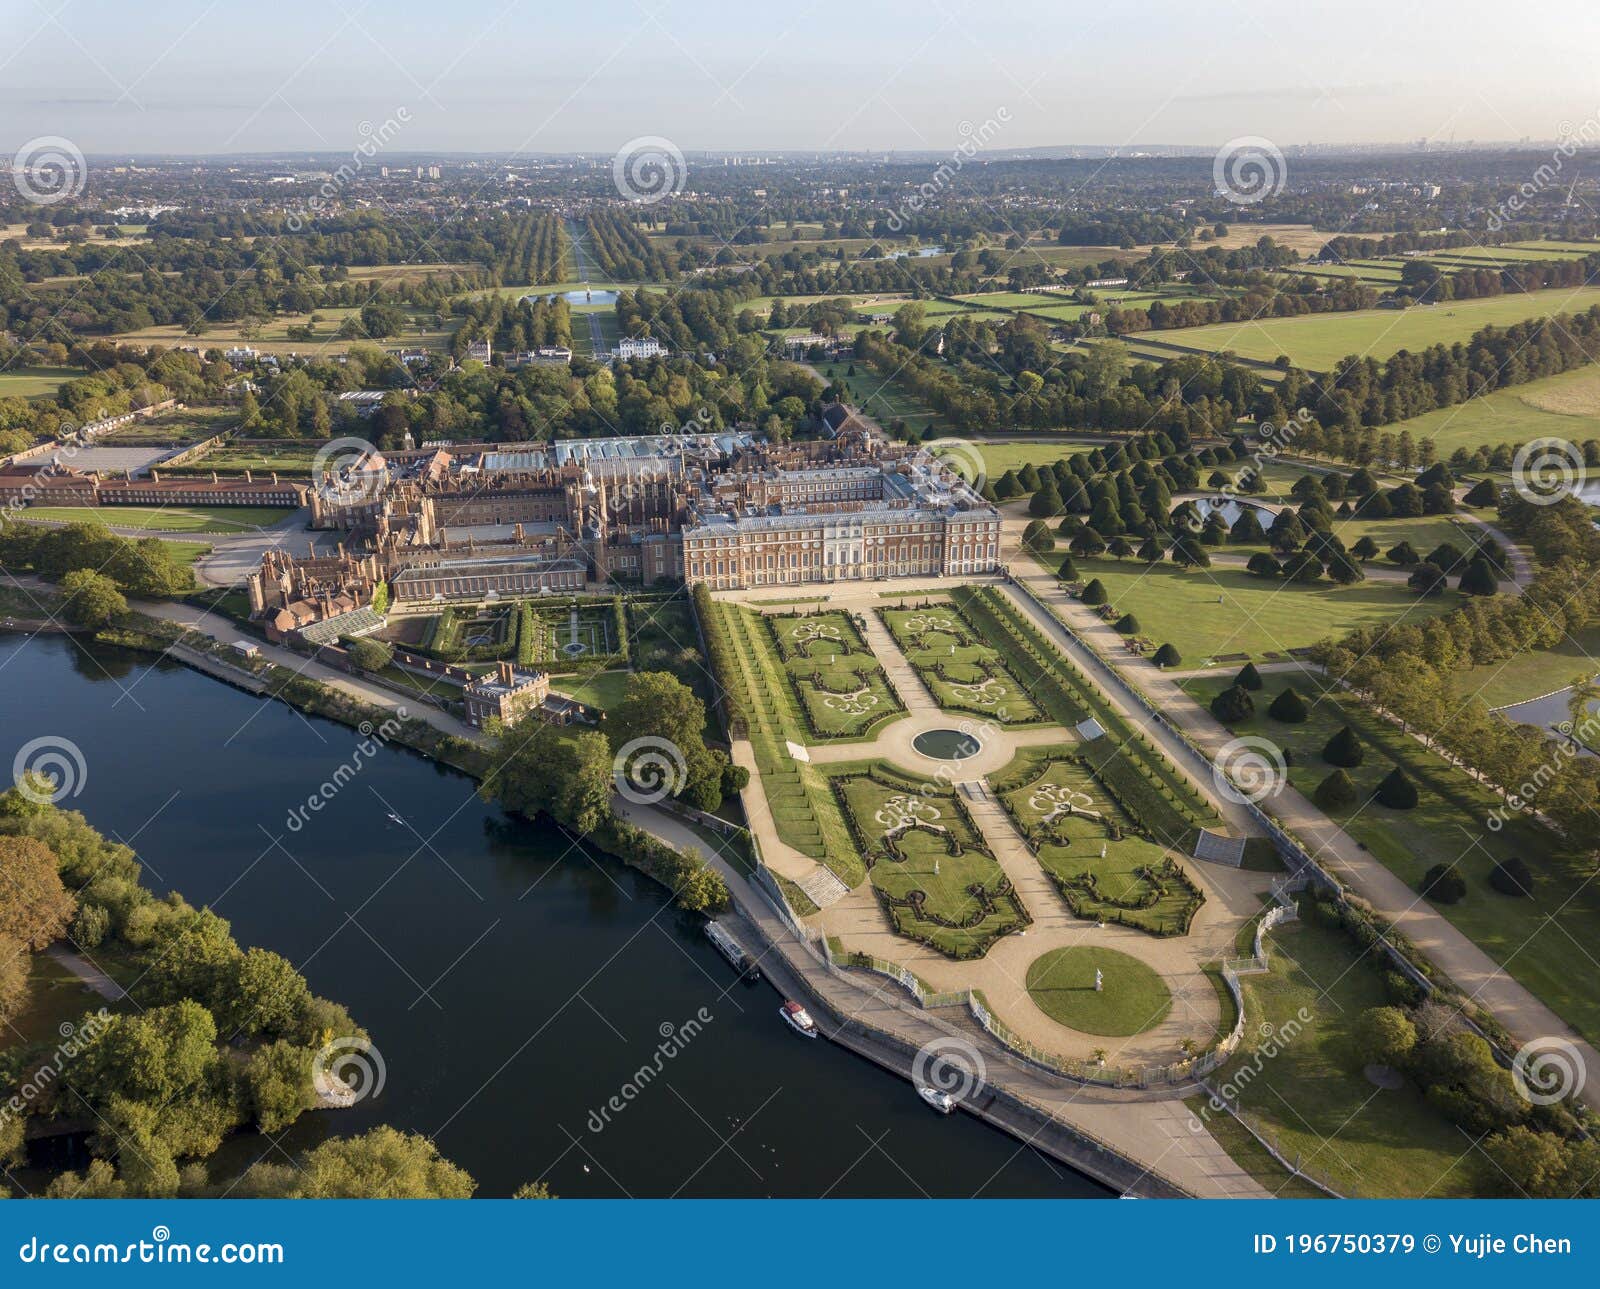 the drone aerial view of  hampton court palace